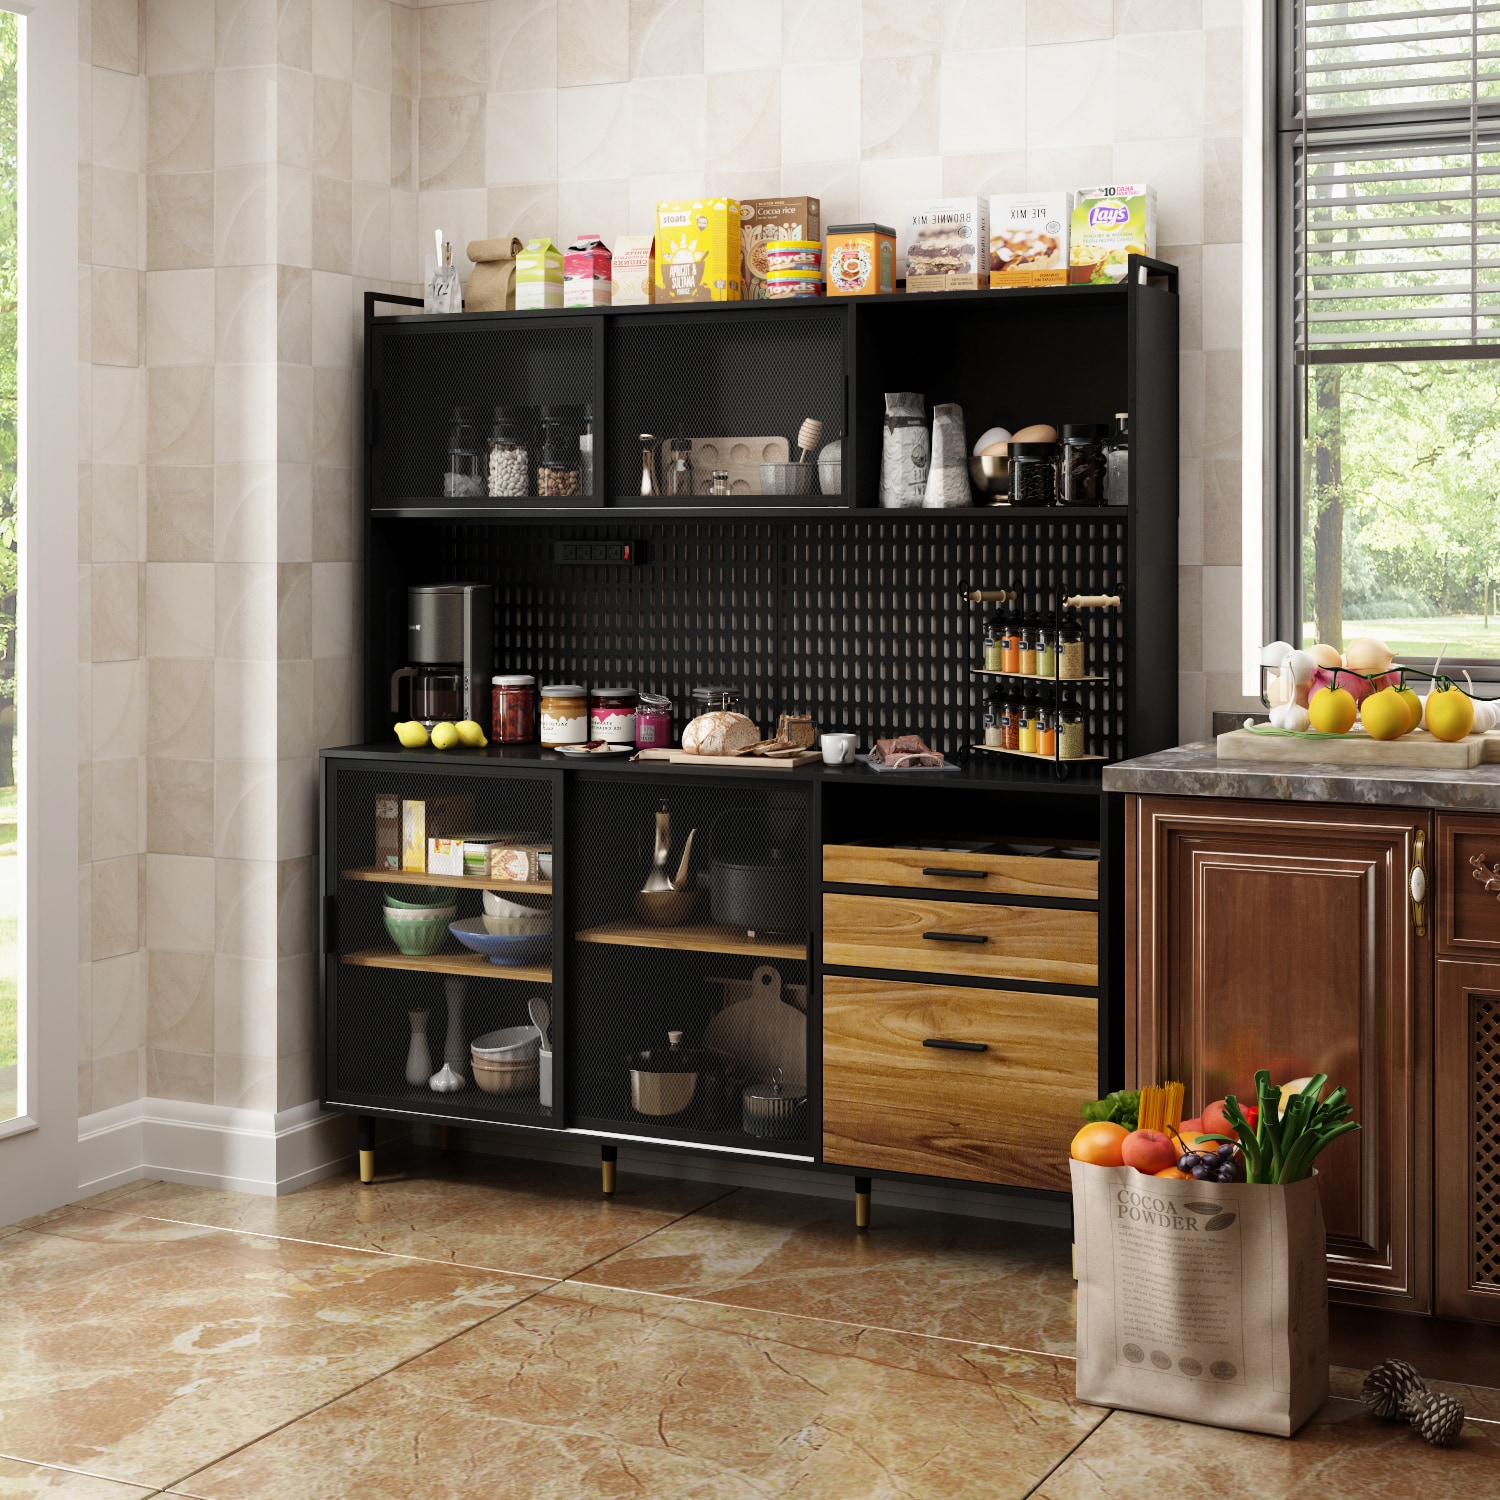 Small U Shaped Pantry with Wicker Labeled Food Bins - Transitional -  Kitchen